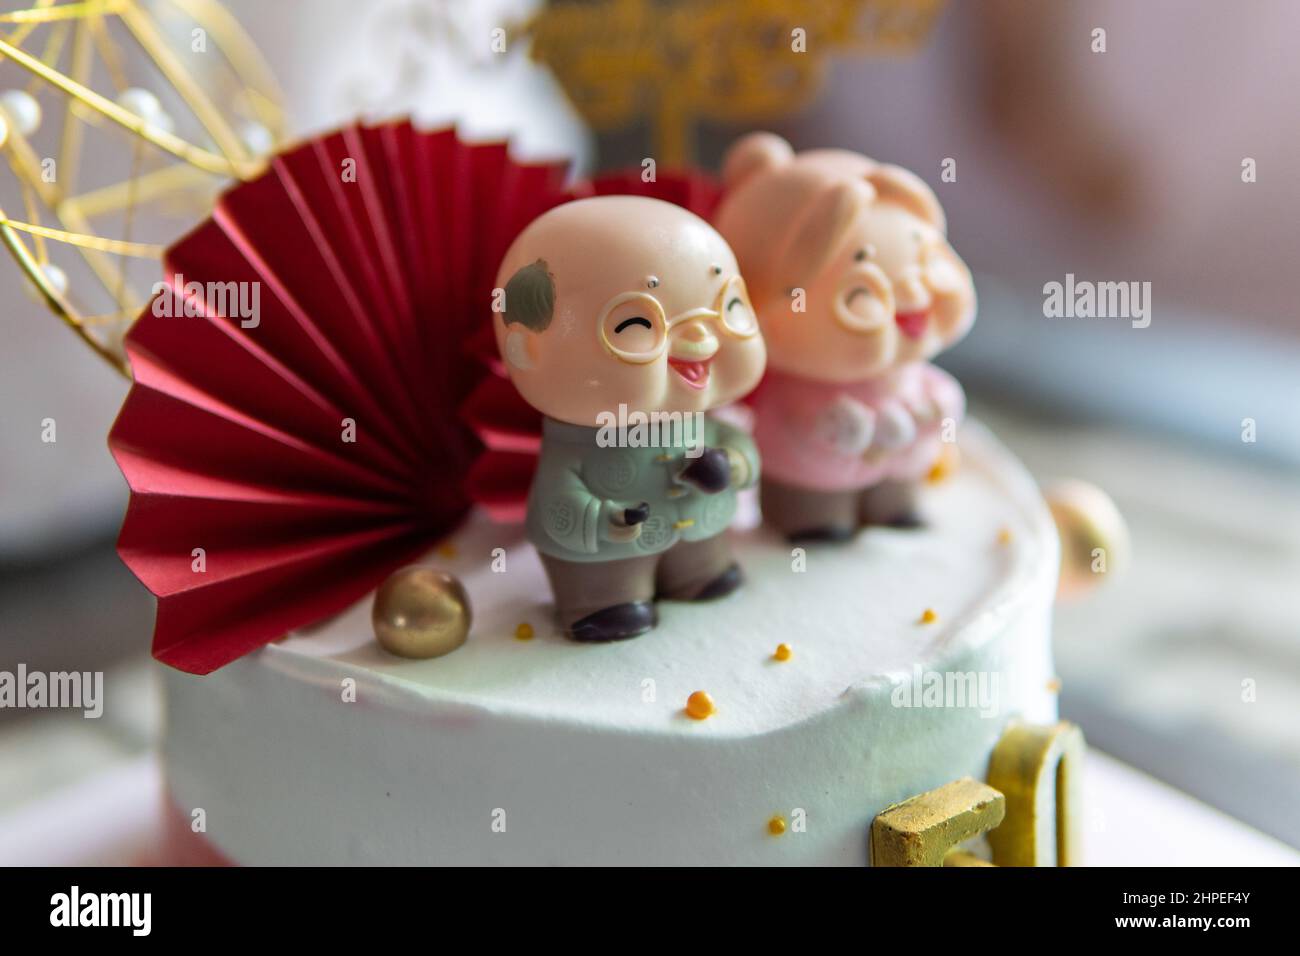 Local lifestyle Chinese style 50 years anniversary cake decoration for parents Stock Photo